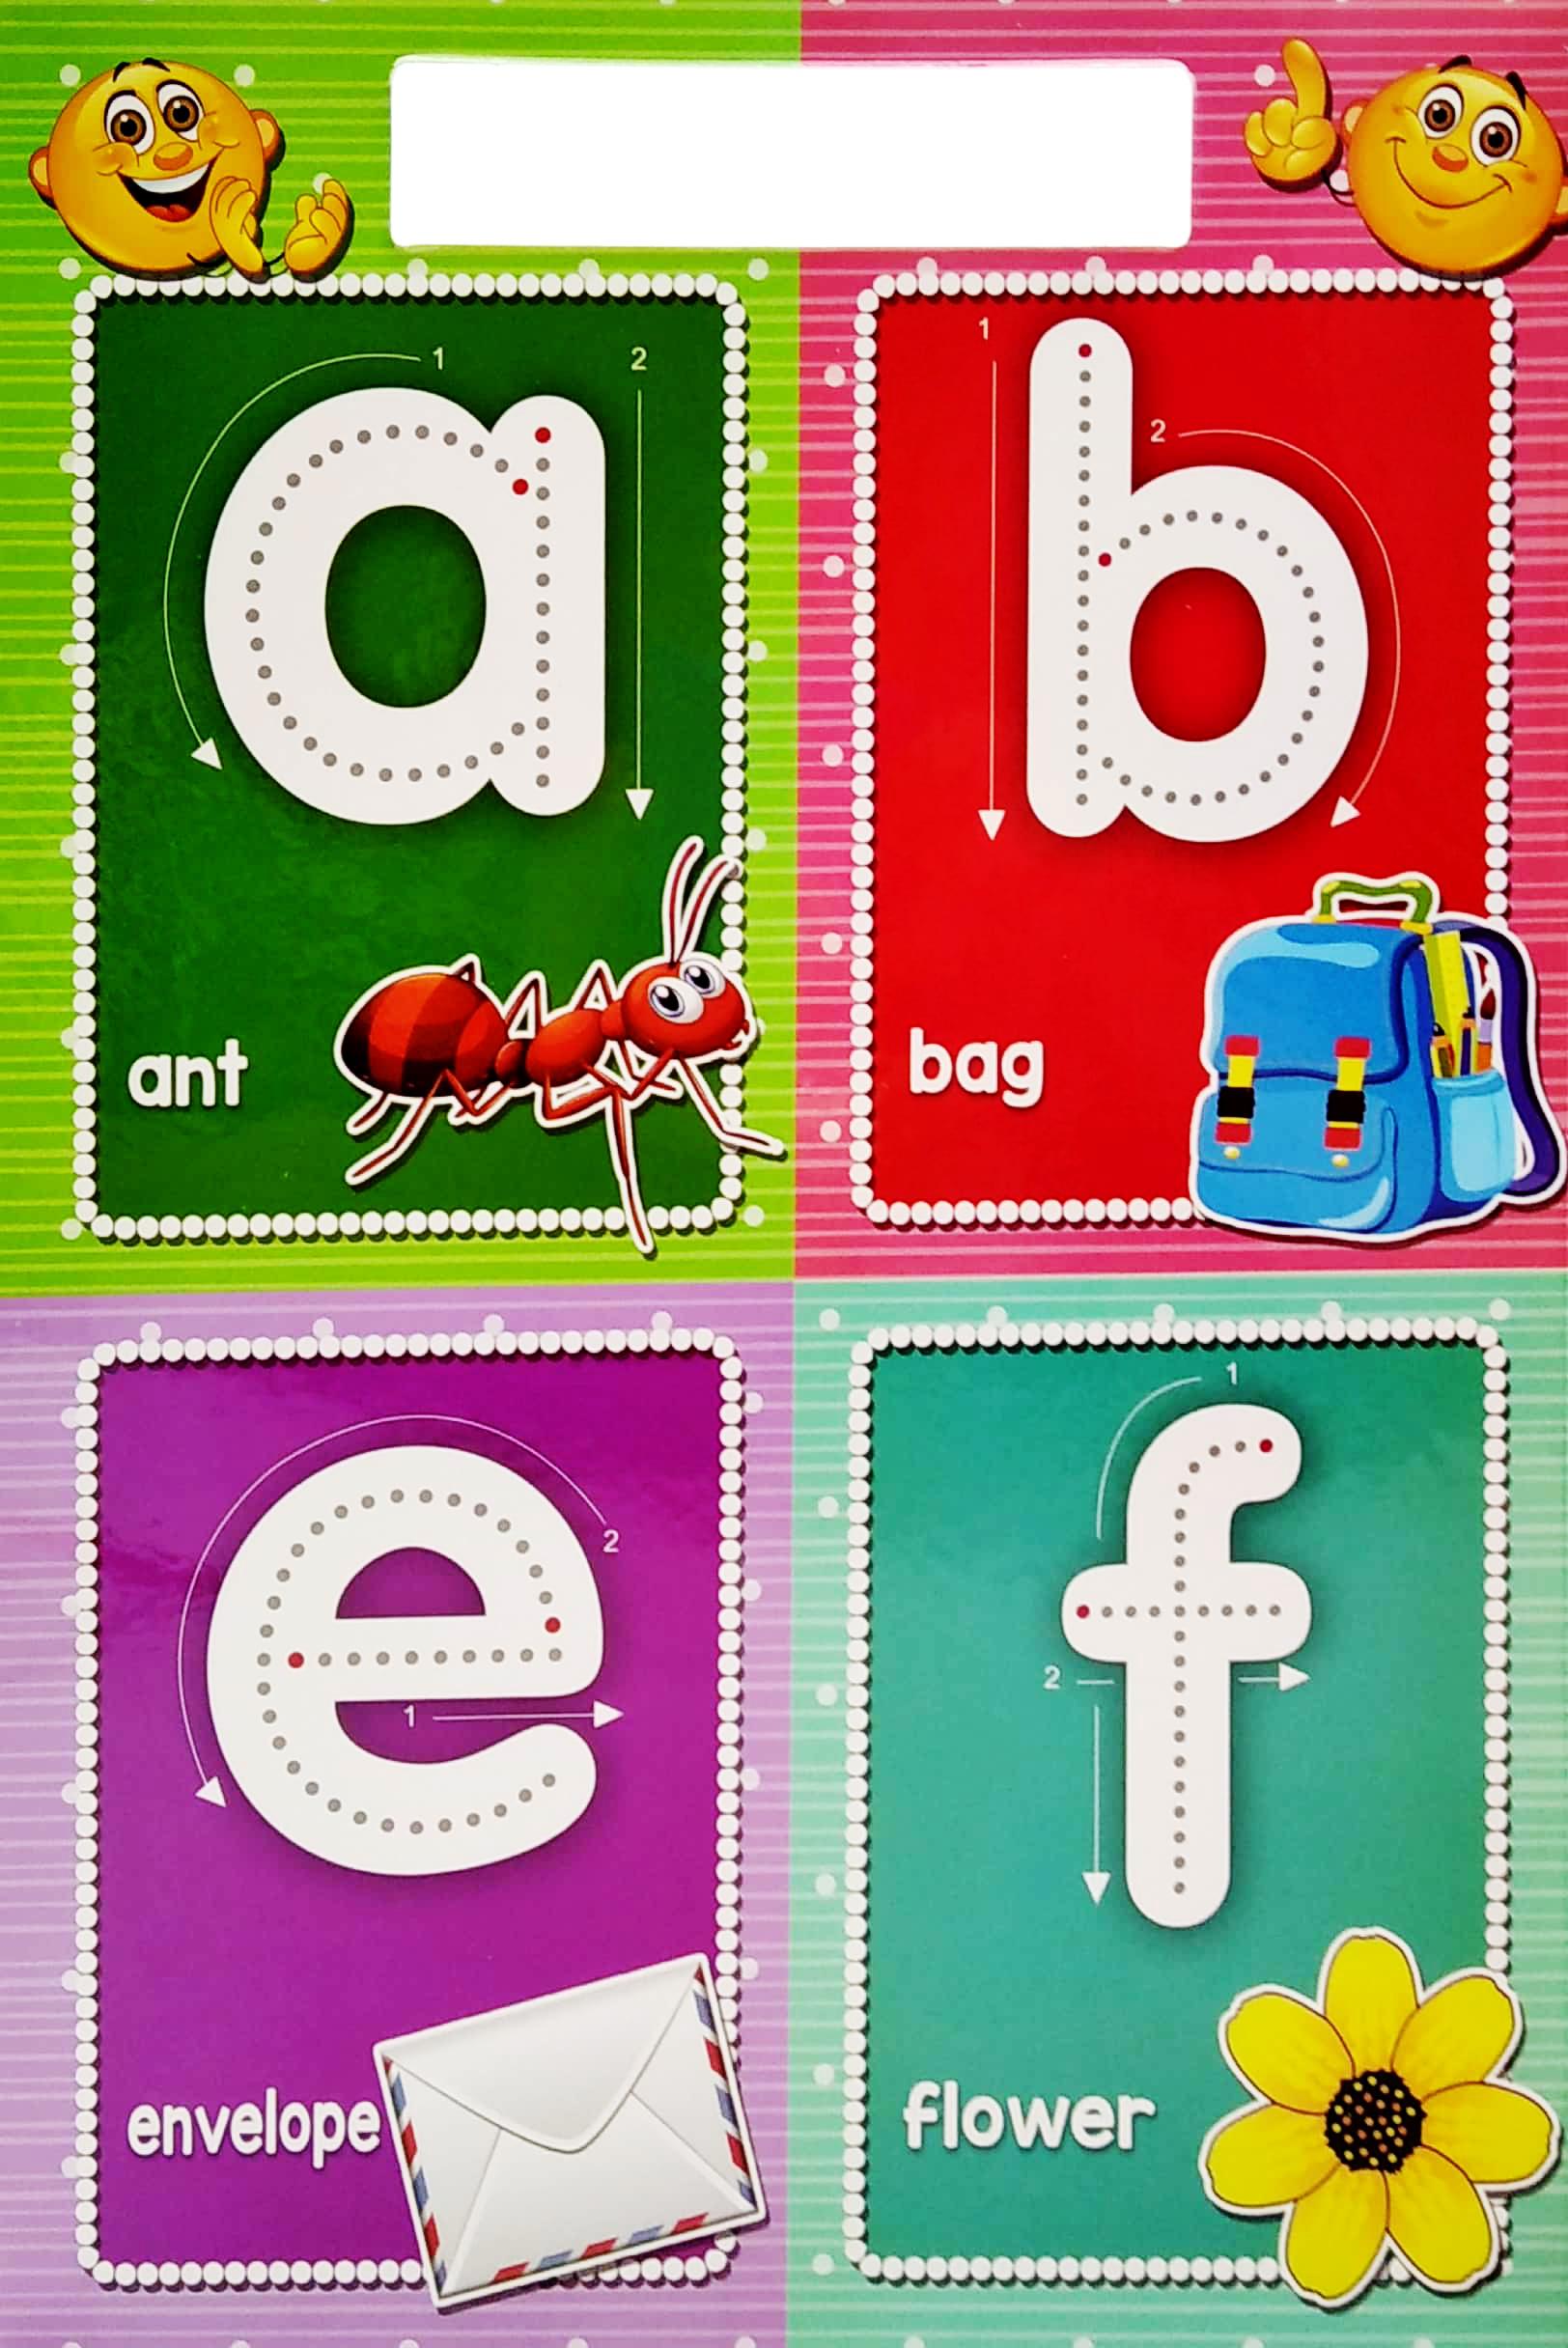 Writing Practices For Little Hands: Alphabet Lower Case